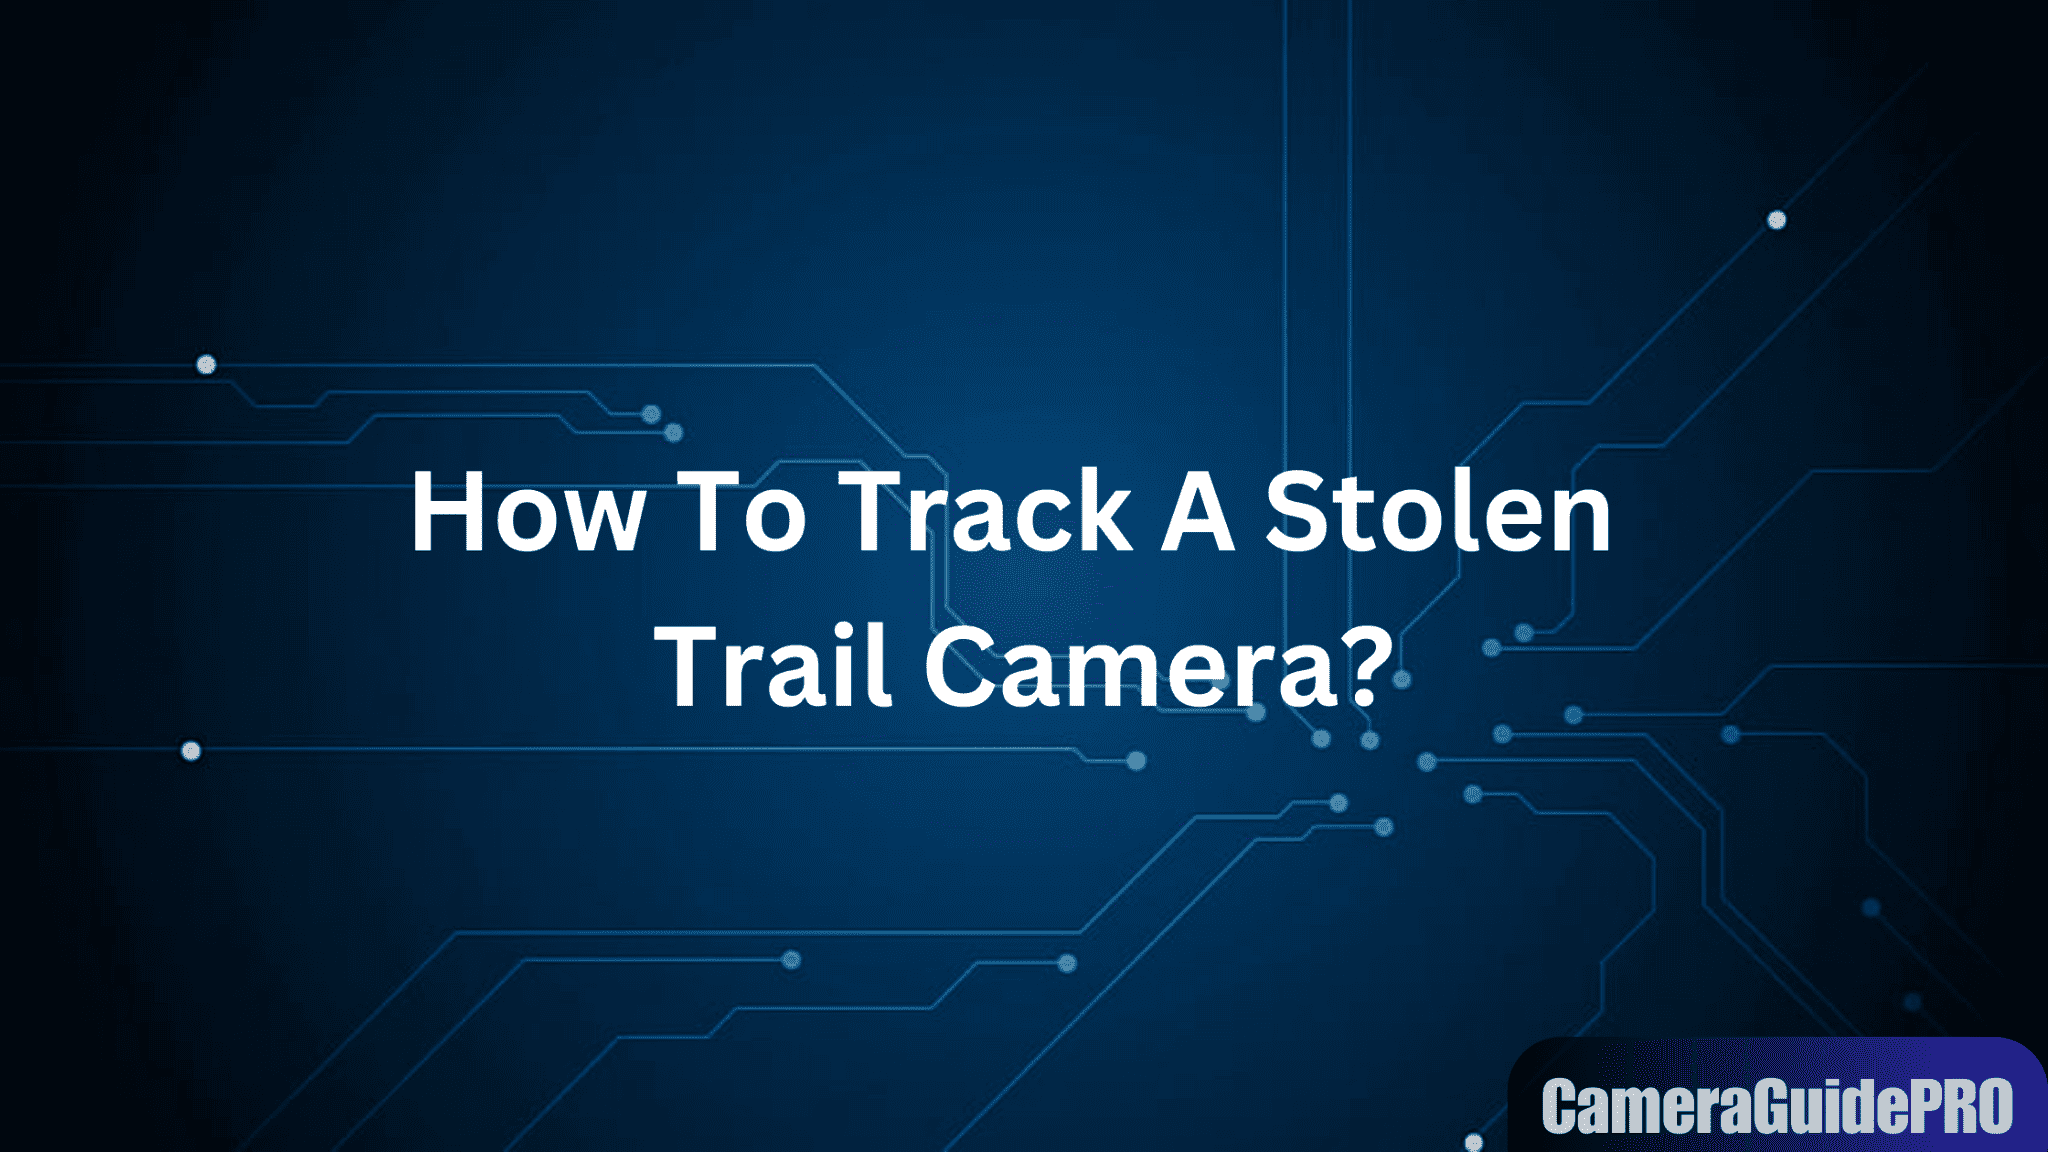 How To Track A Stolen Trail Camera